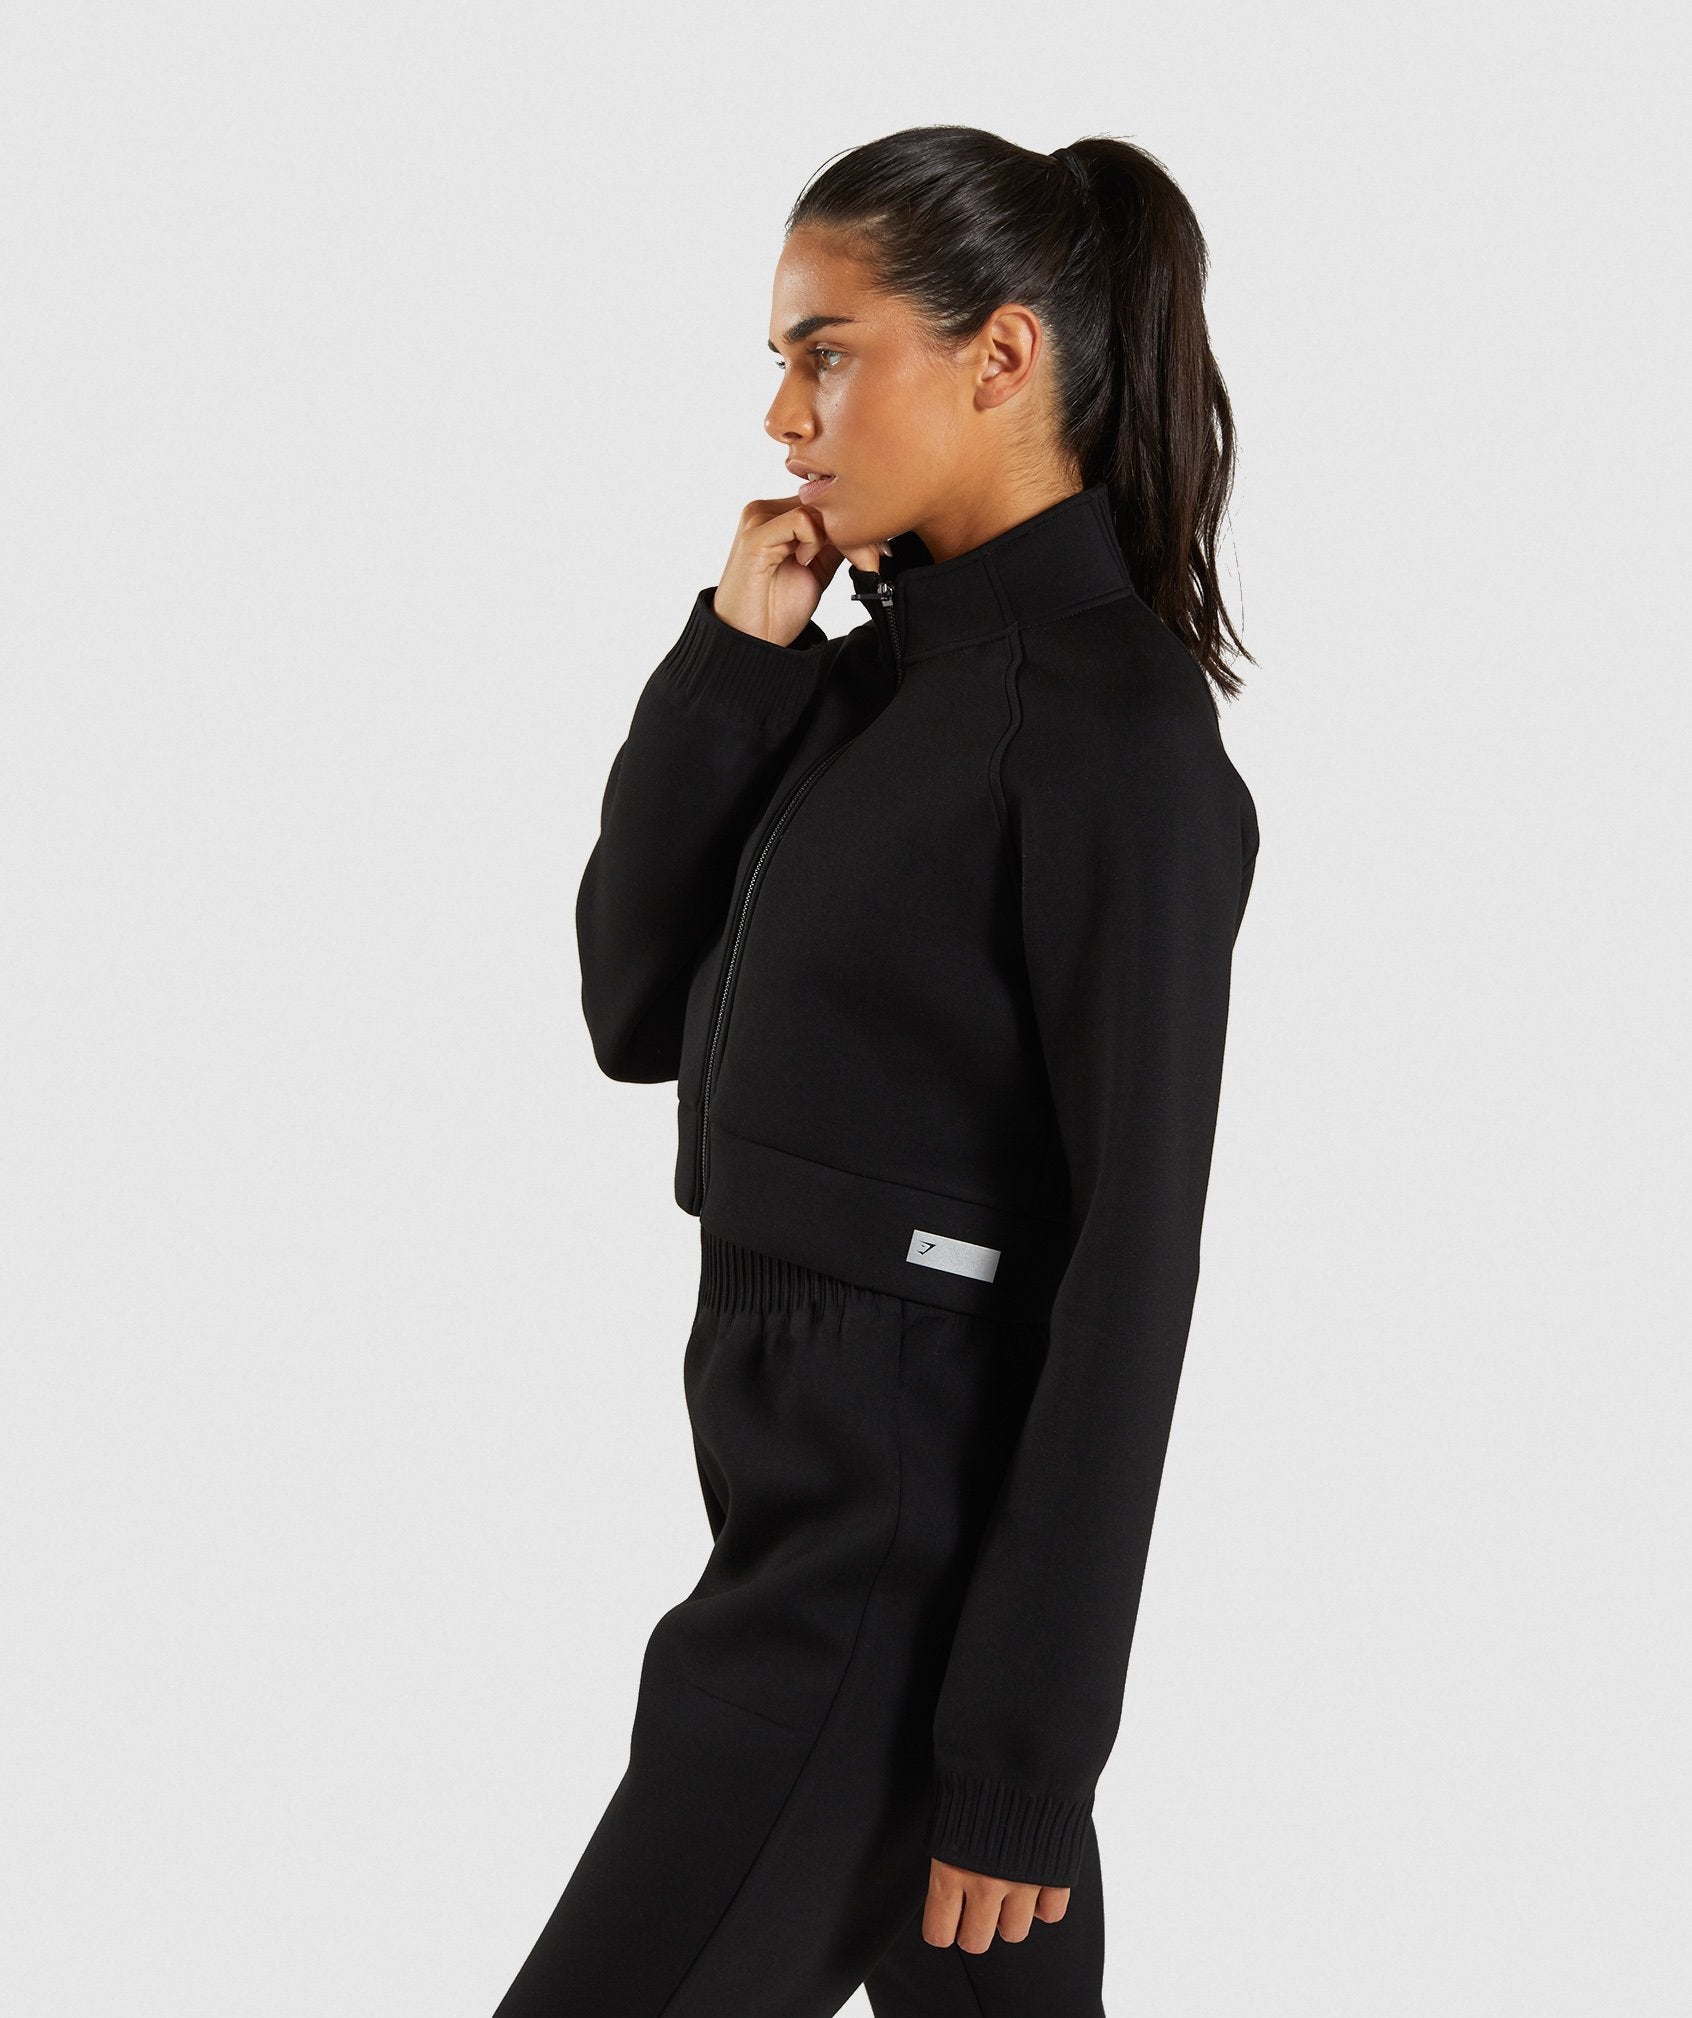 Ruched Track Top Jacket in Black - view 3